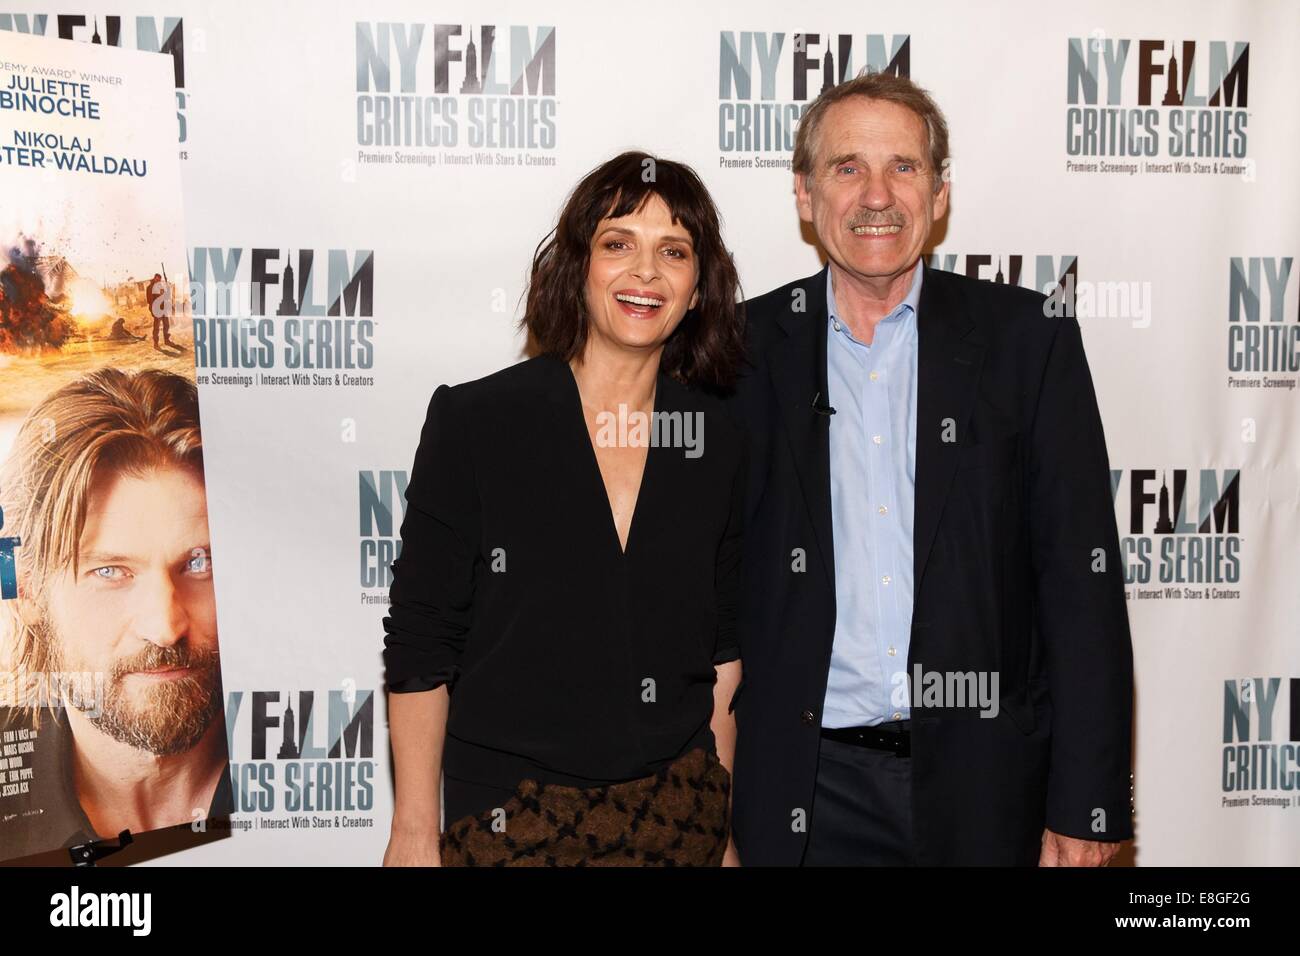 New York, NY, USA. 7th Oct, 2014. Juliette Binoche, Peter Travers at arrivals for 1,000 TIMES GOOD NIGHT Screening, AMC Empire 25 Theatre, New York, NY October 7, 2014. Credit:  Jason Smith/Everett Collection/Alamy Live News Stock Photo